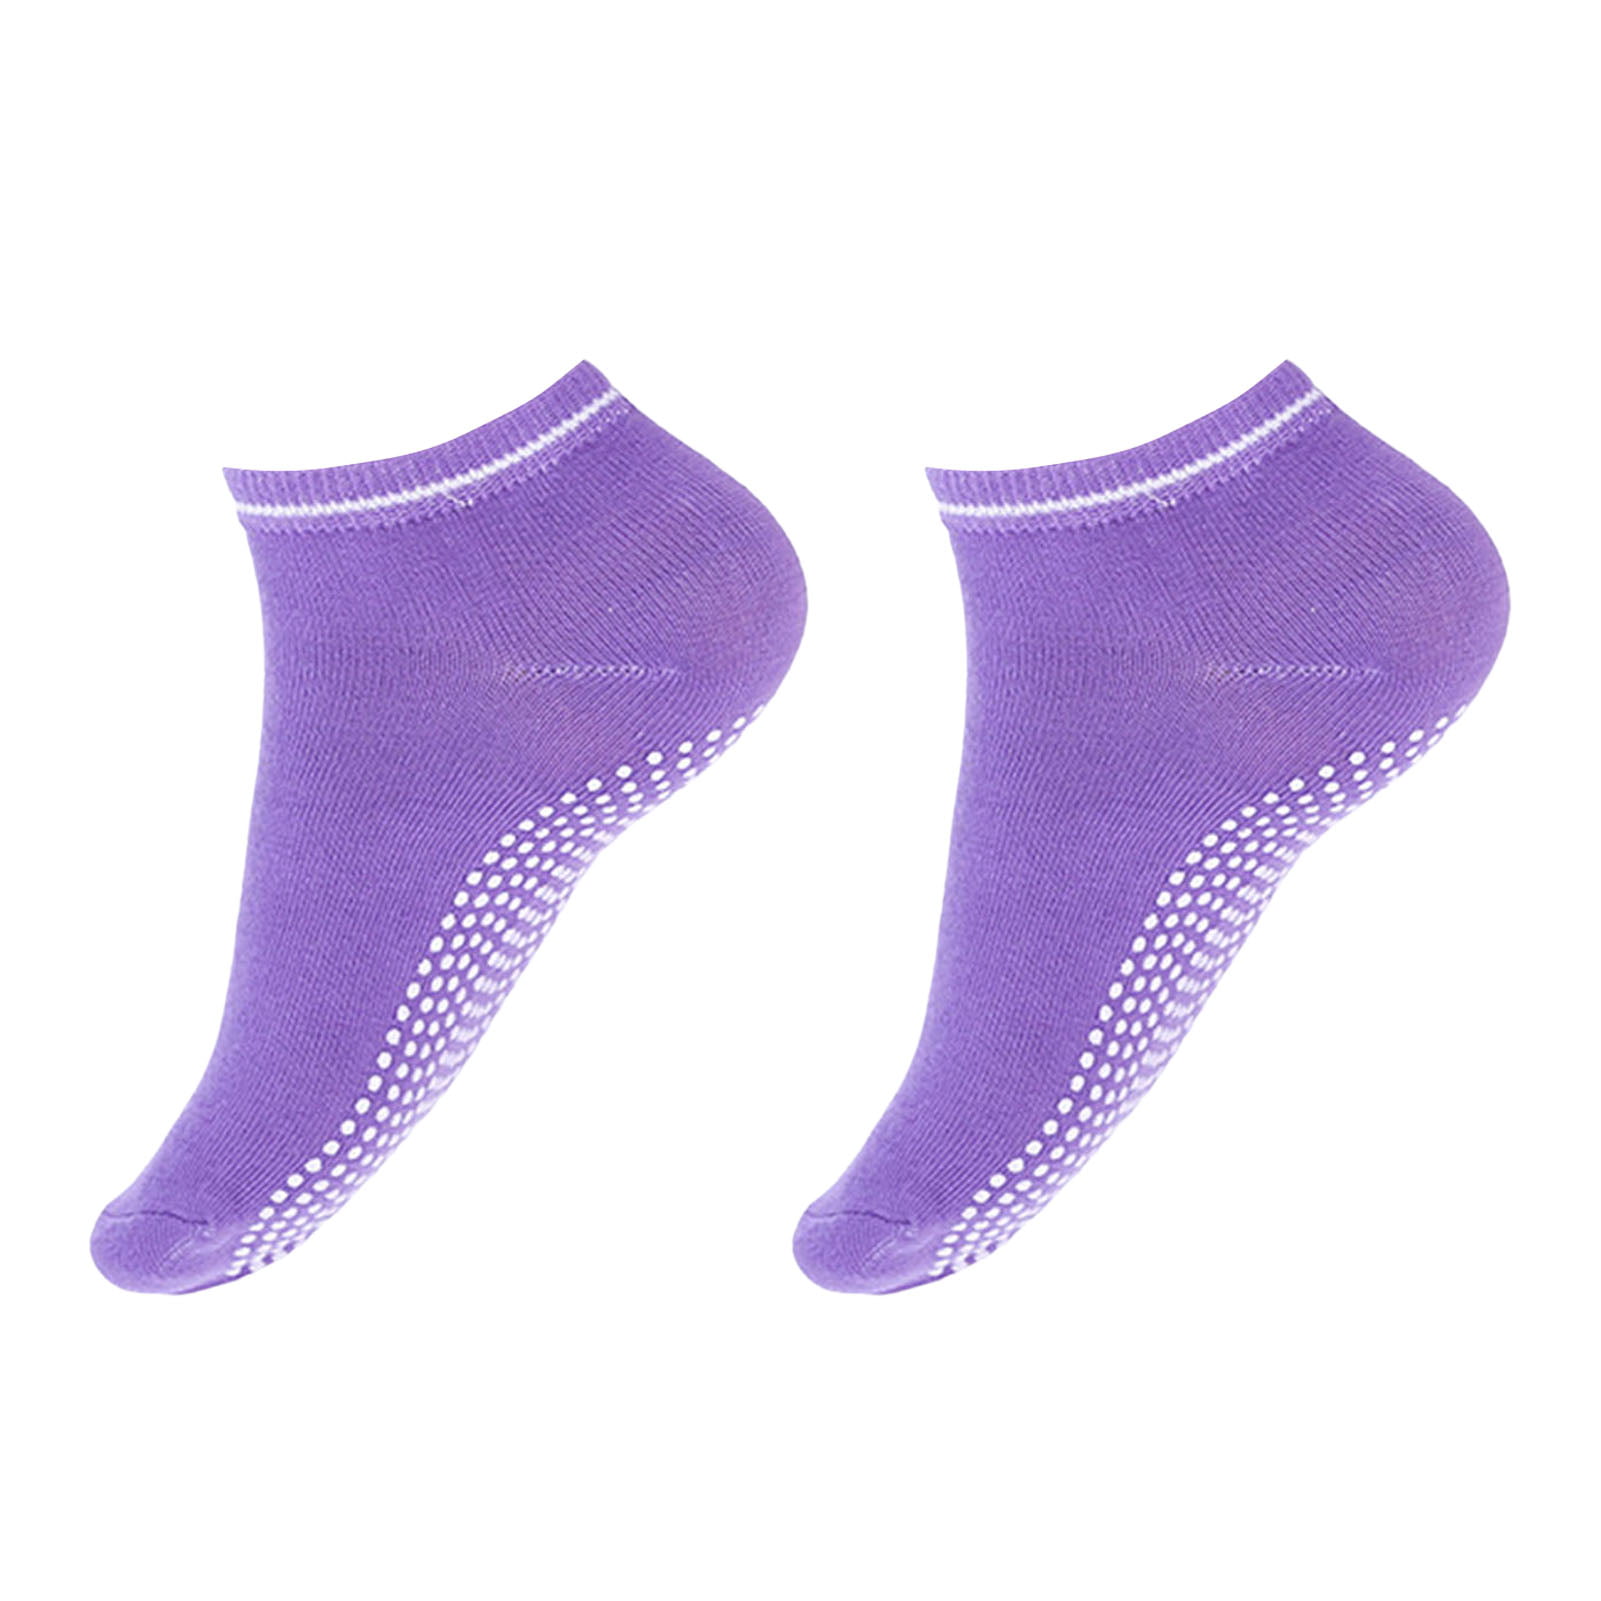 VONKY 1 Pair Non-slip Breathable Toeless Socks with Grips Portable